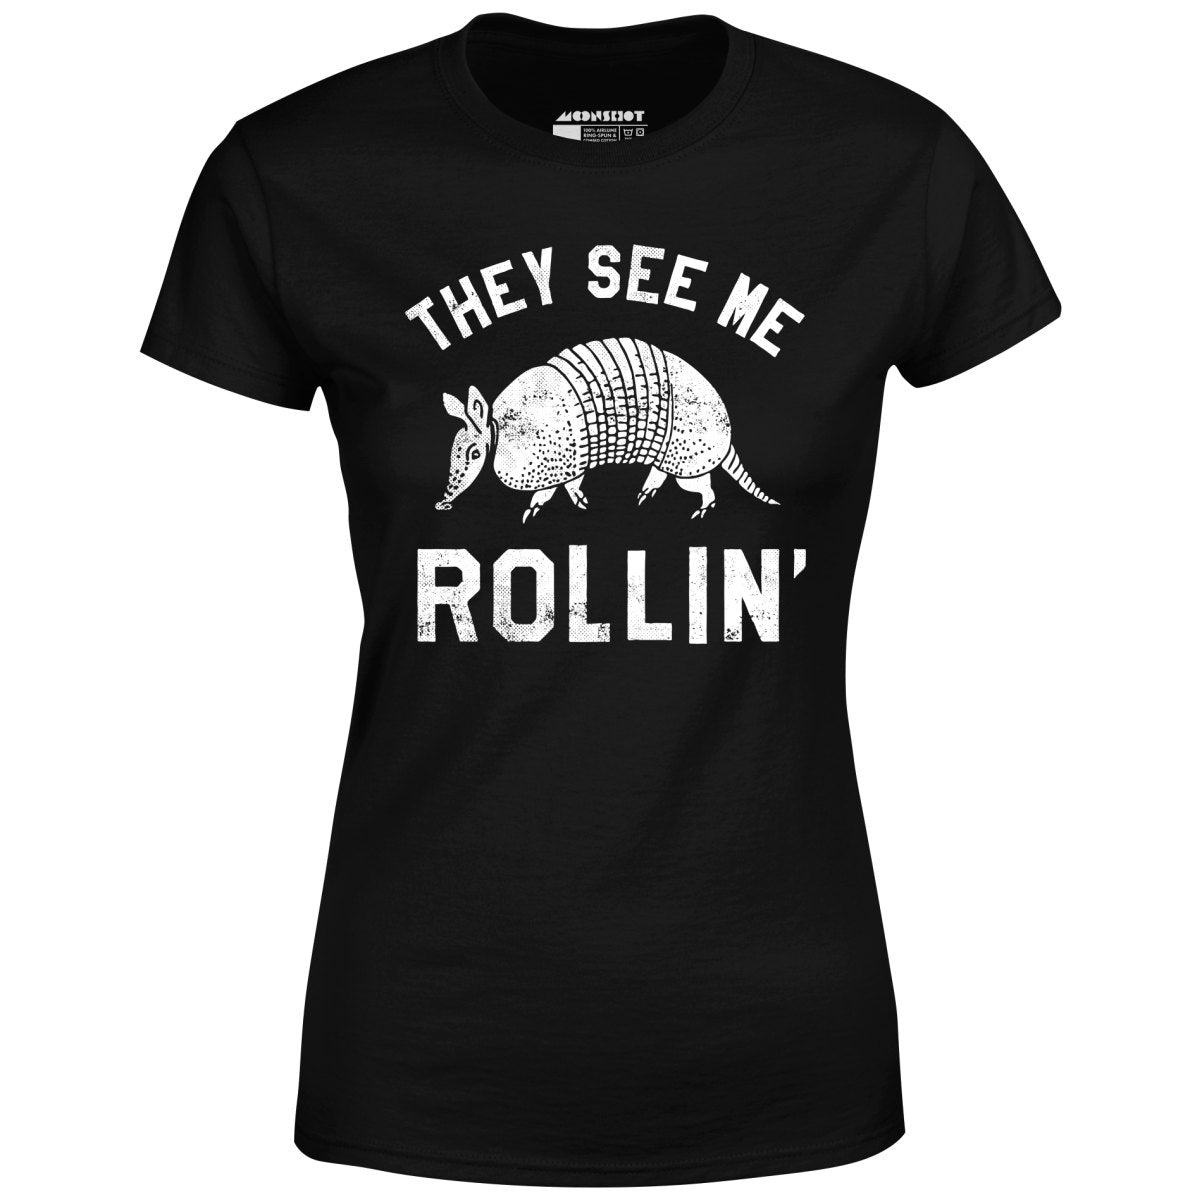 They See Me Rollin' - Women's T-Shirt